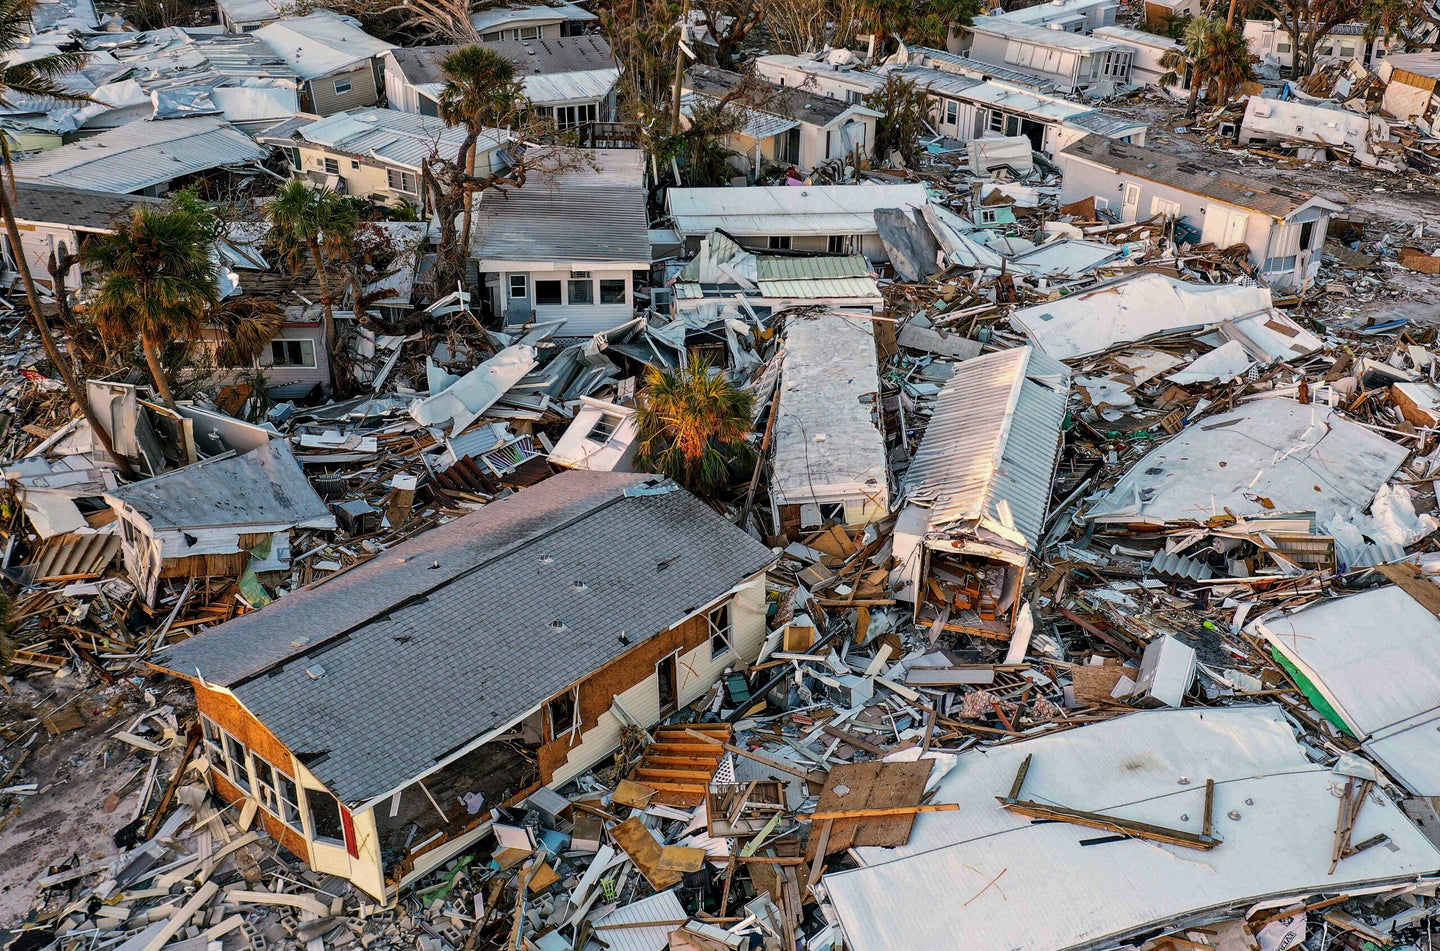 Heavily damaged mobile homes in Fort Myers Beach, Florida a month after Hurricane Ian made landfall on September 28 as a Category 4 hurricane.